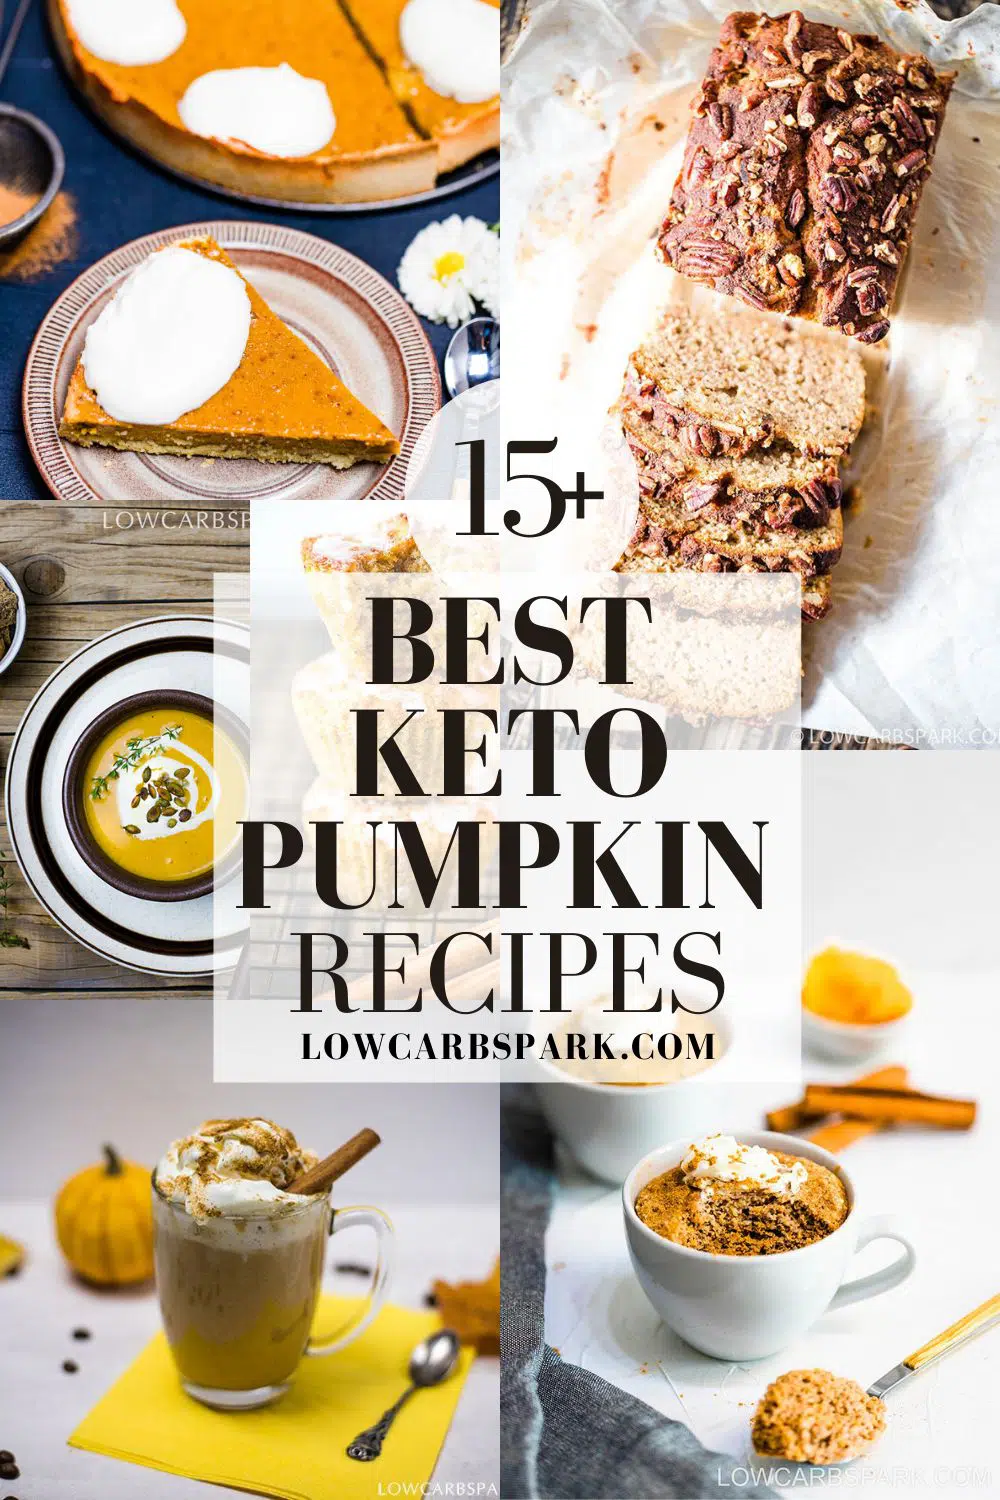 15 Best Keto Pumpkin Recipes You Can Make This Fall